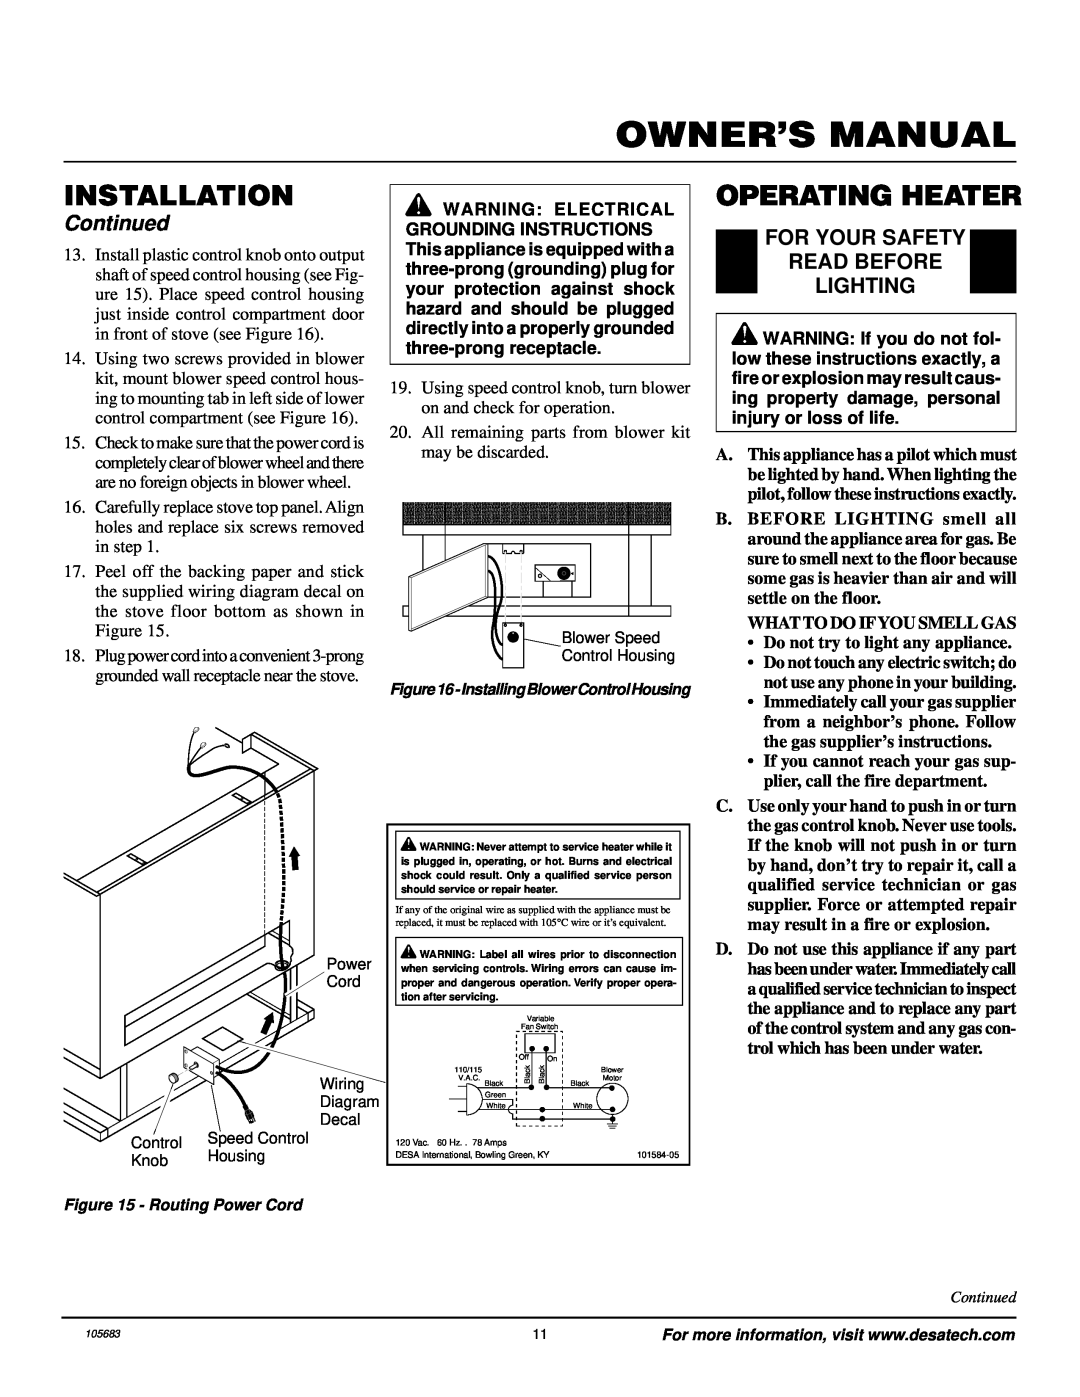 Desa S26NT Operating Heater, For Your Safety Read Before Lighting, Owner’S Manual, Installation, Continued 